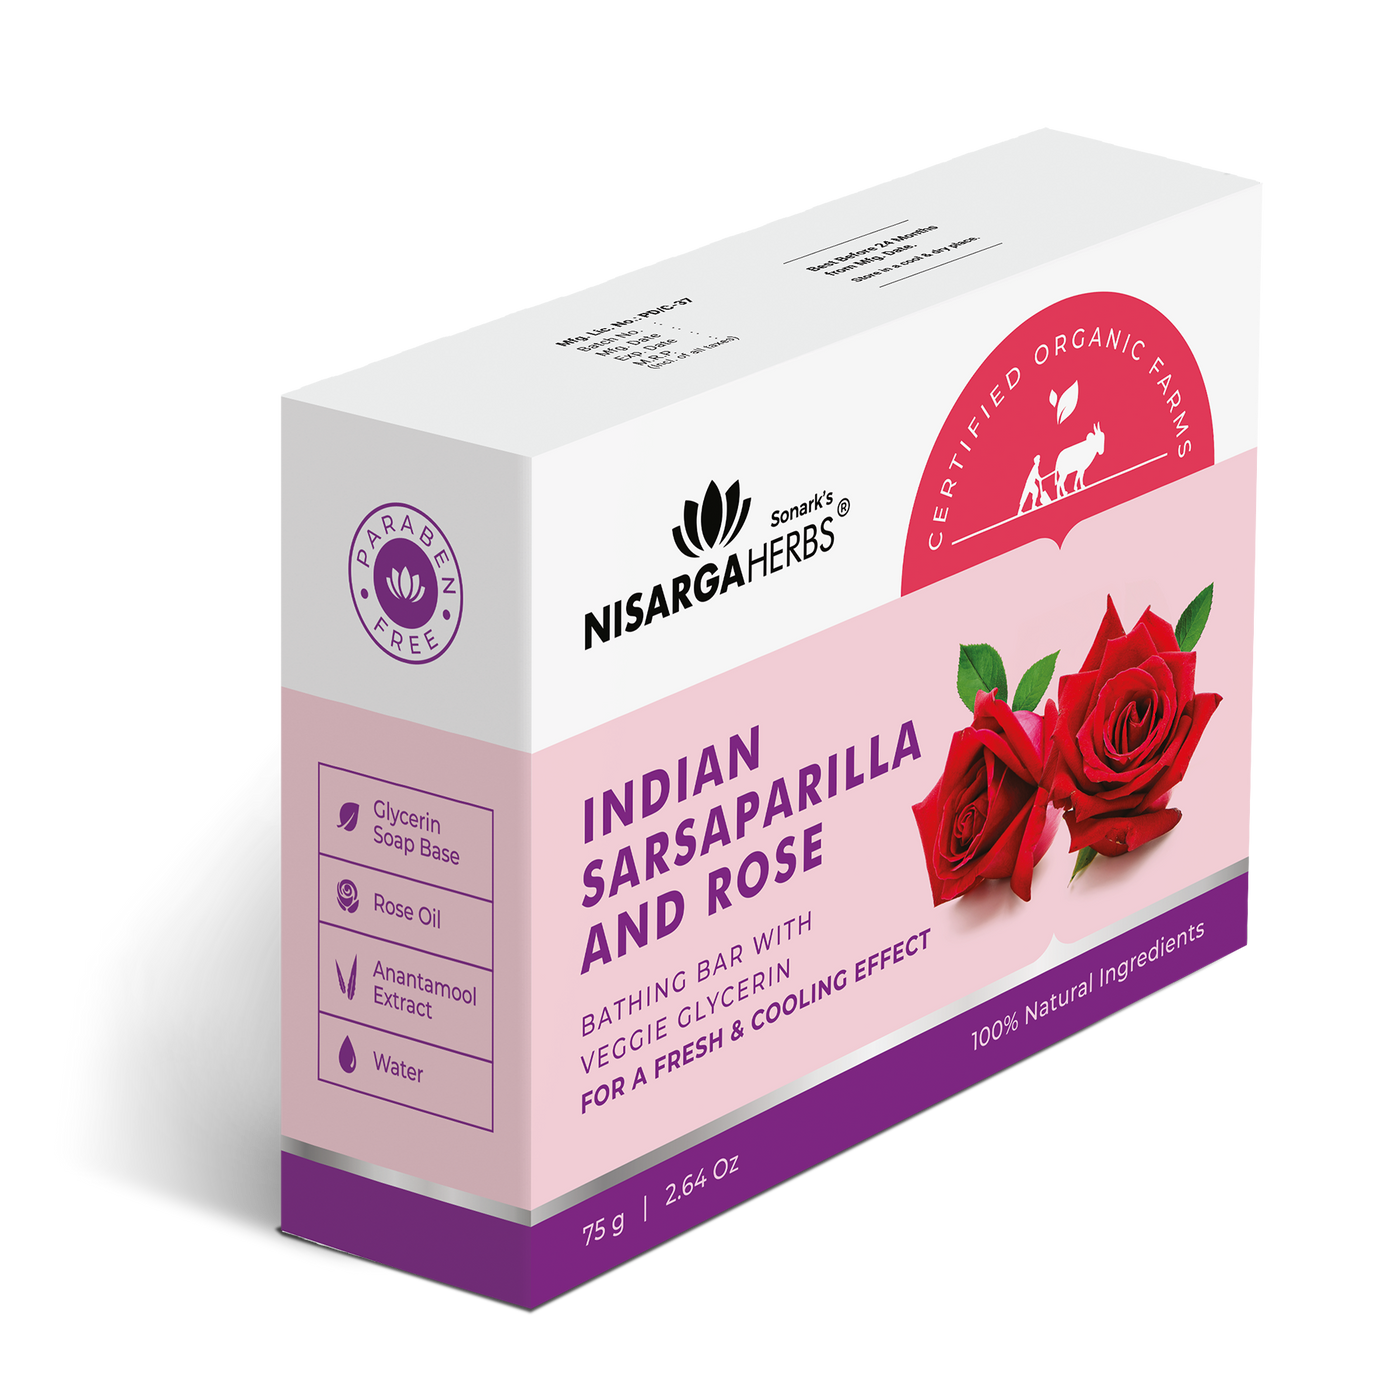 Indian Sarsaparilla & Rose Soap - Purifies the skin and offers a cooling sensation